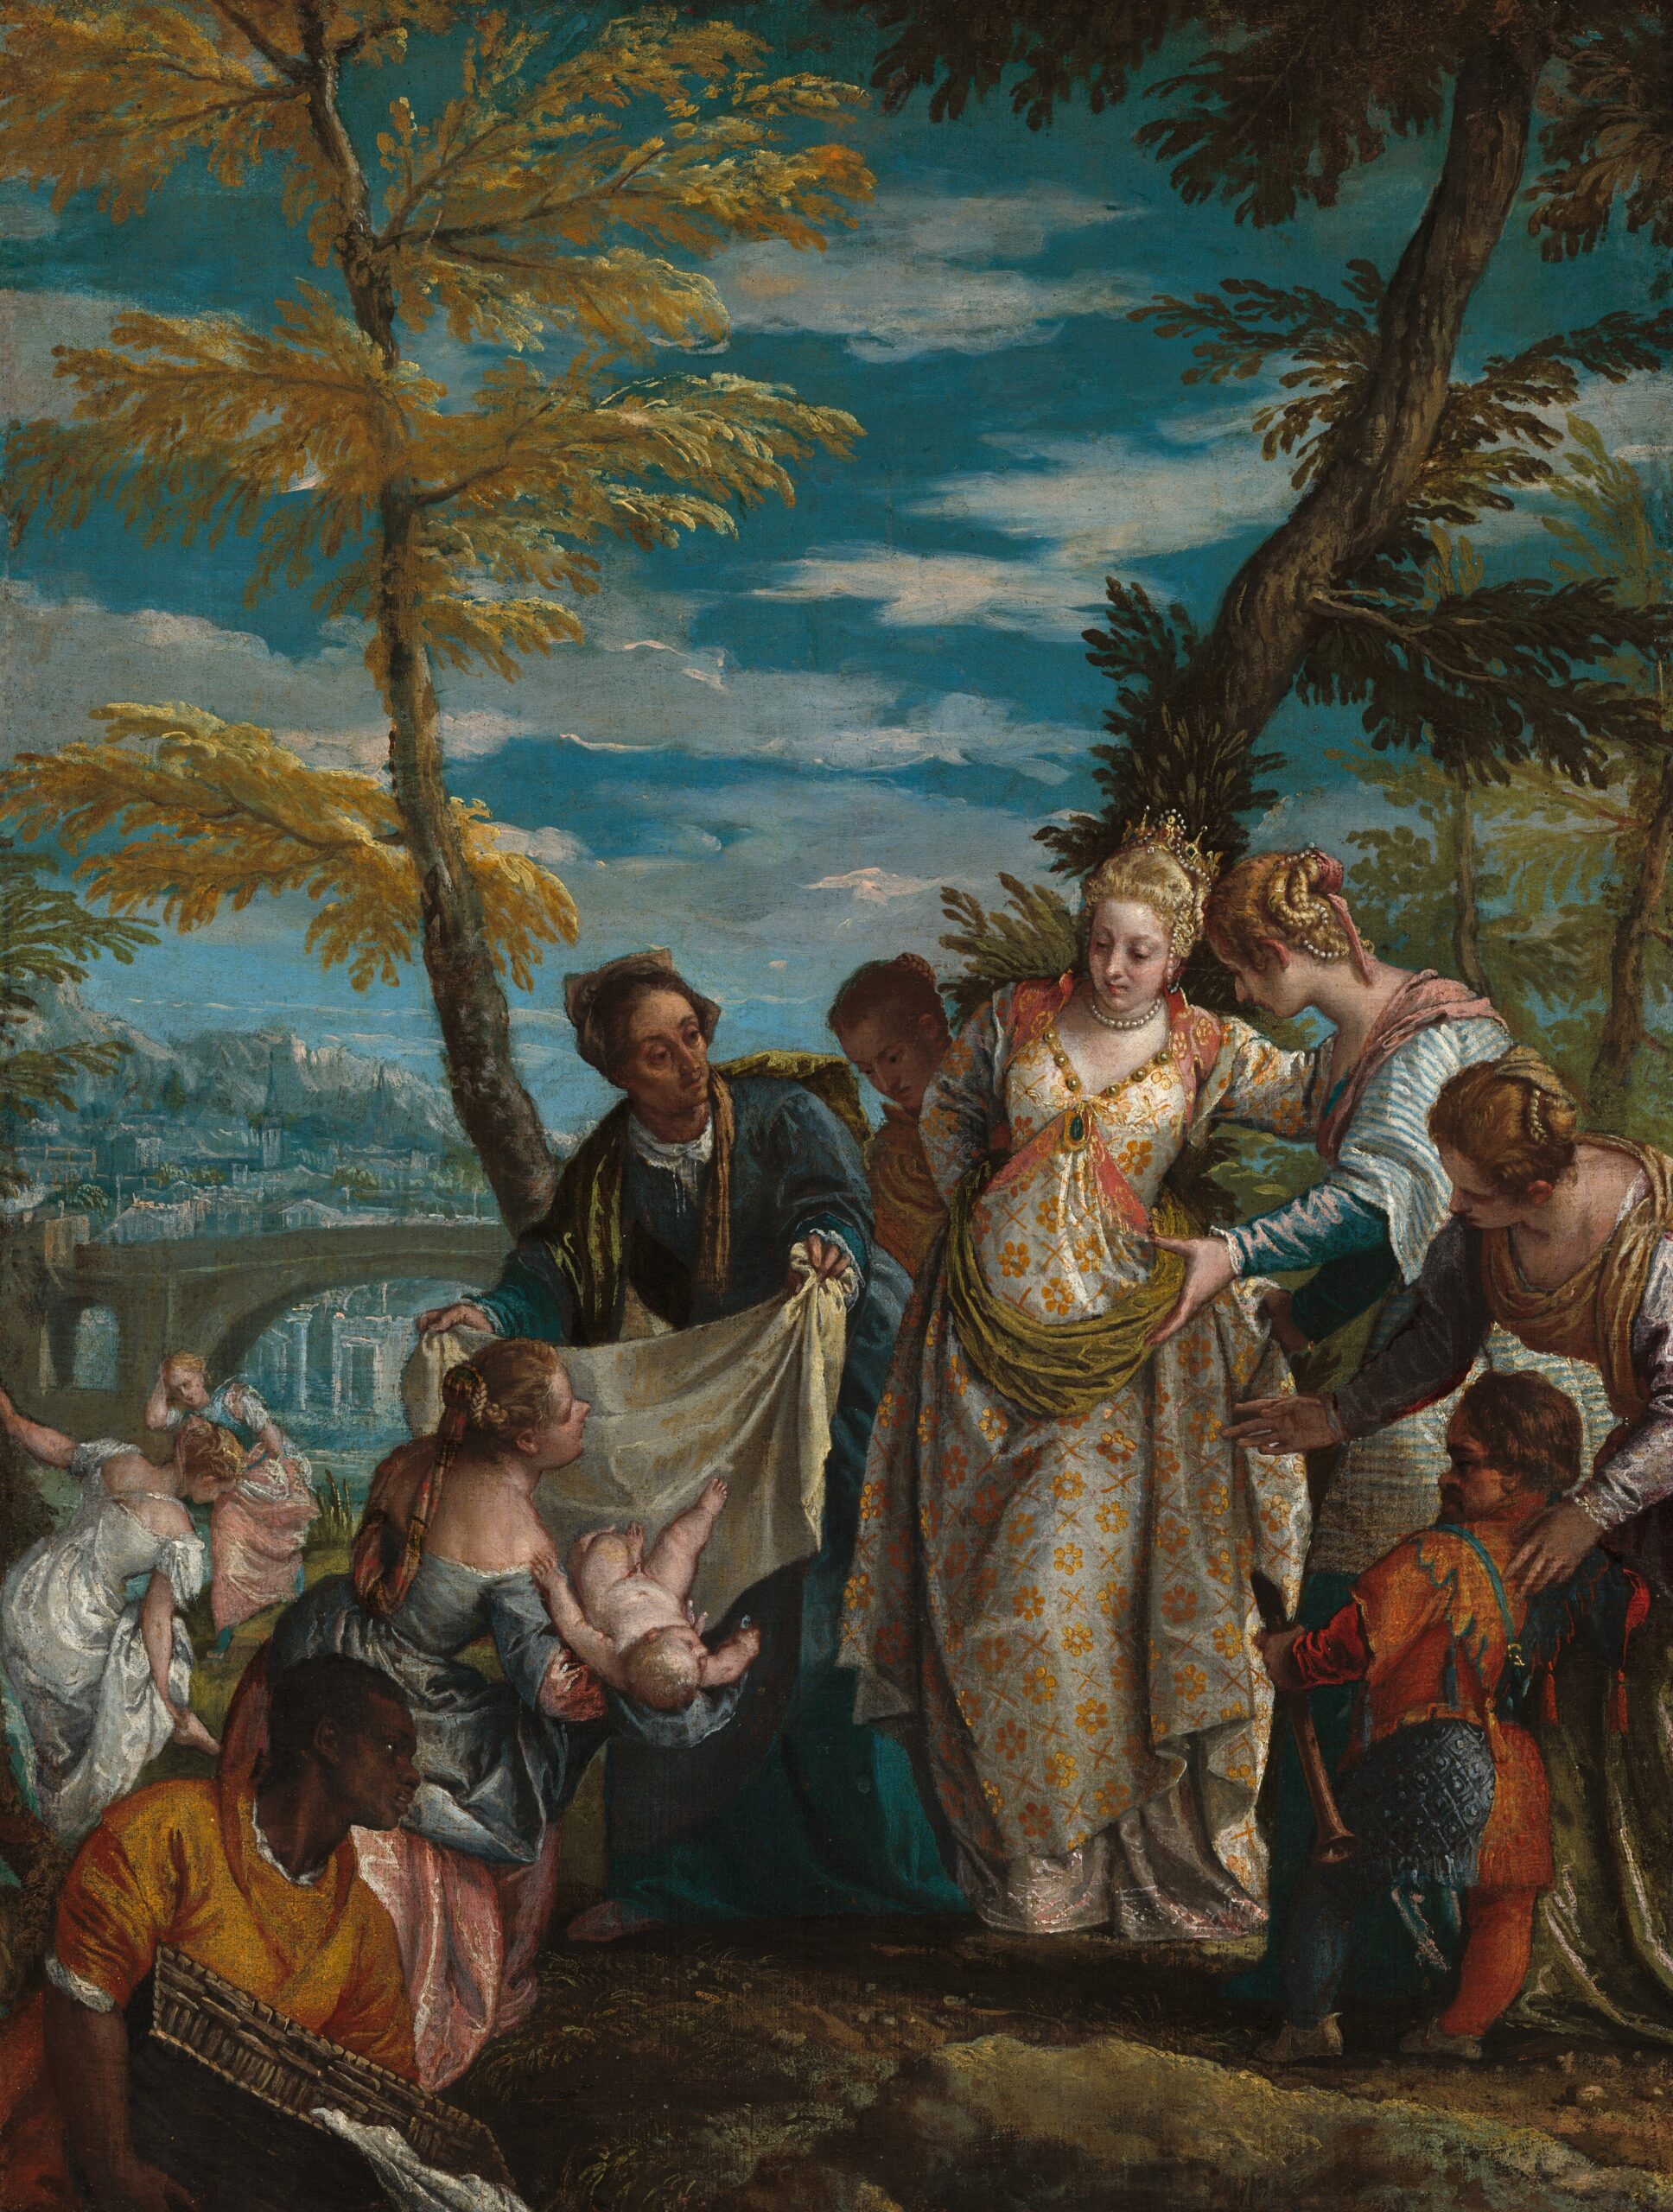 Figures crowd around one woman with some standing and some kneeling around her. A kneeling woman present a newborn baby. (famoust paintings)